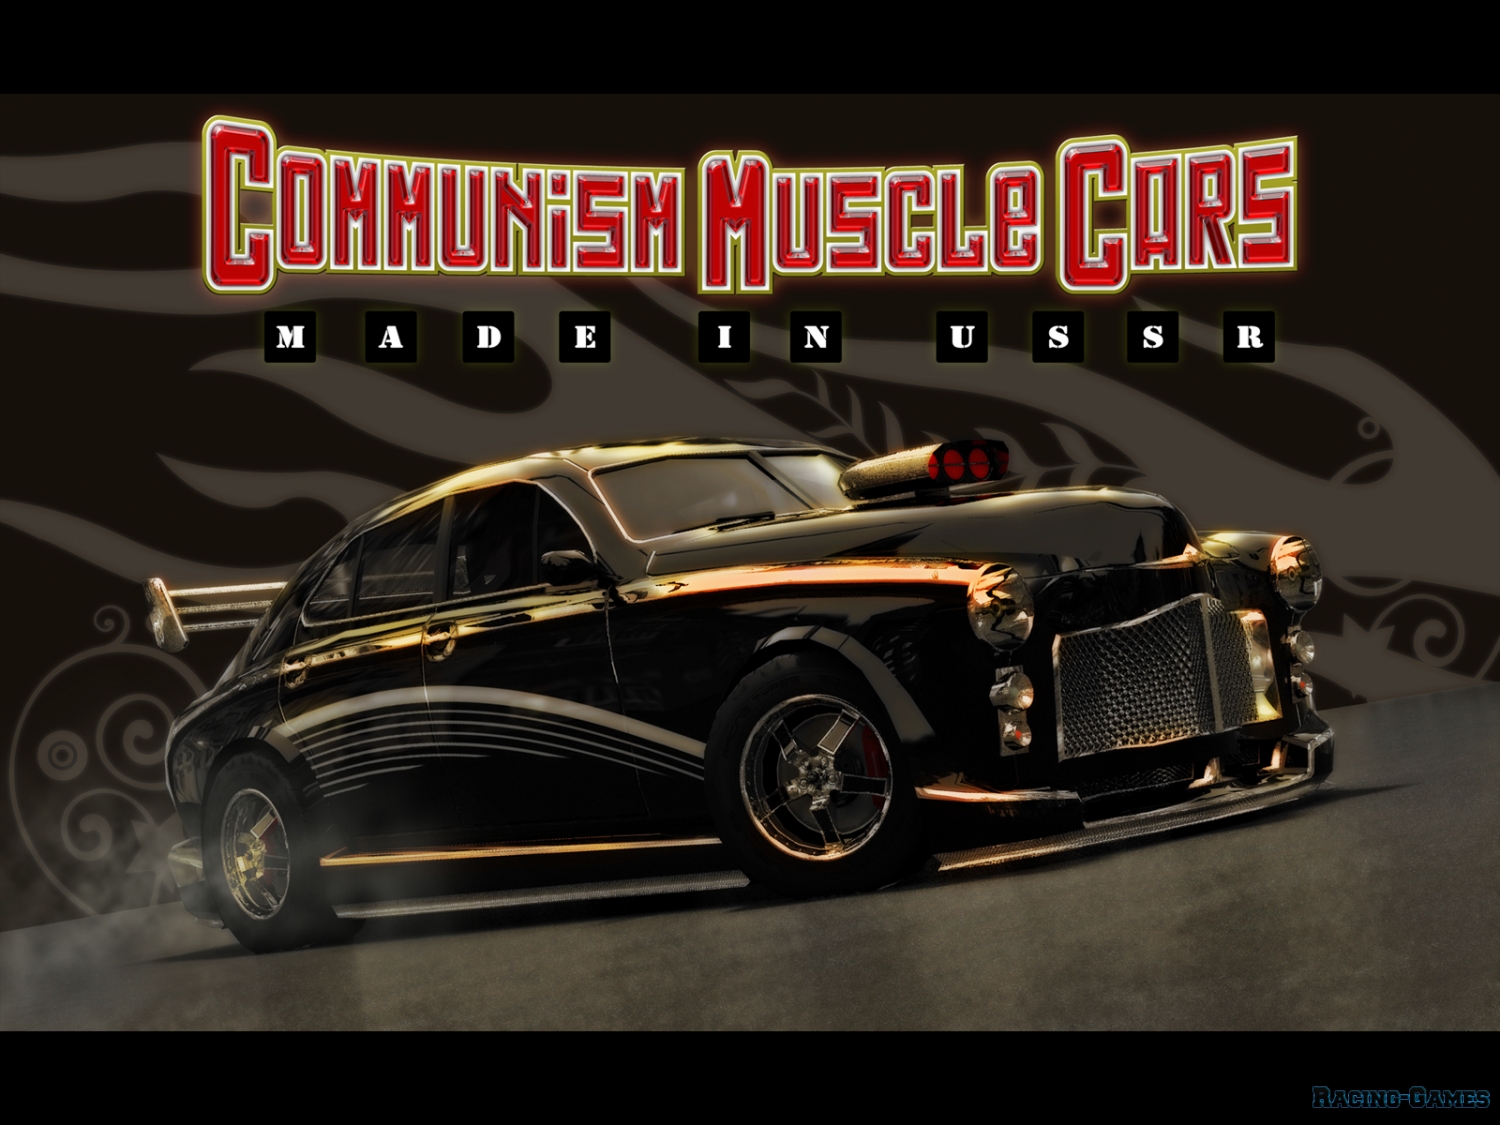 Communism Muscle Cars: Made in USSR (2010/PC/RUS)